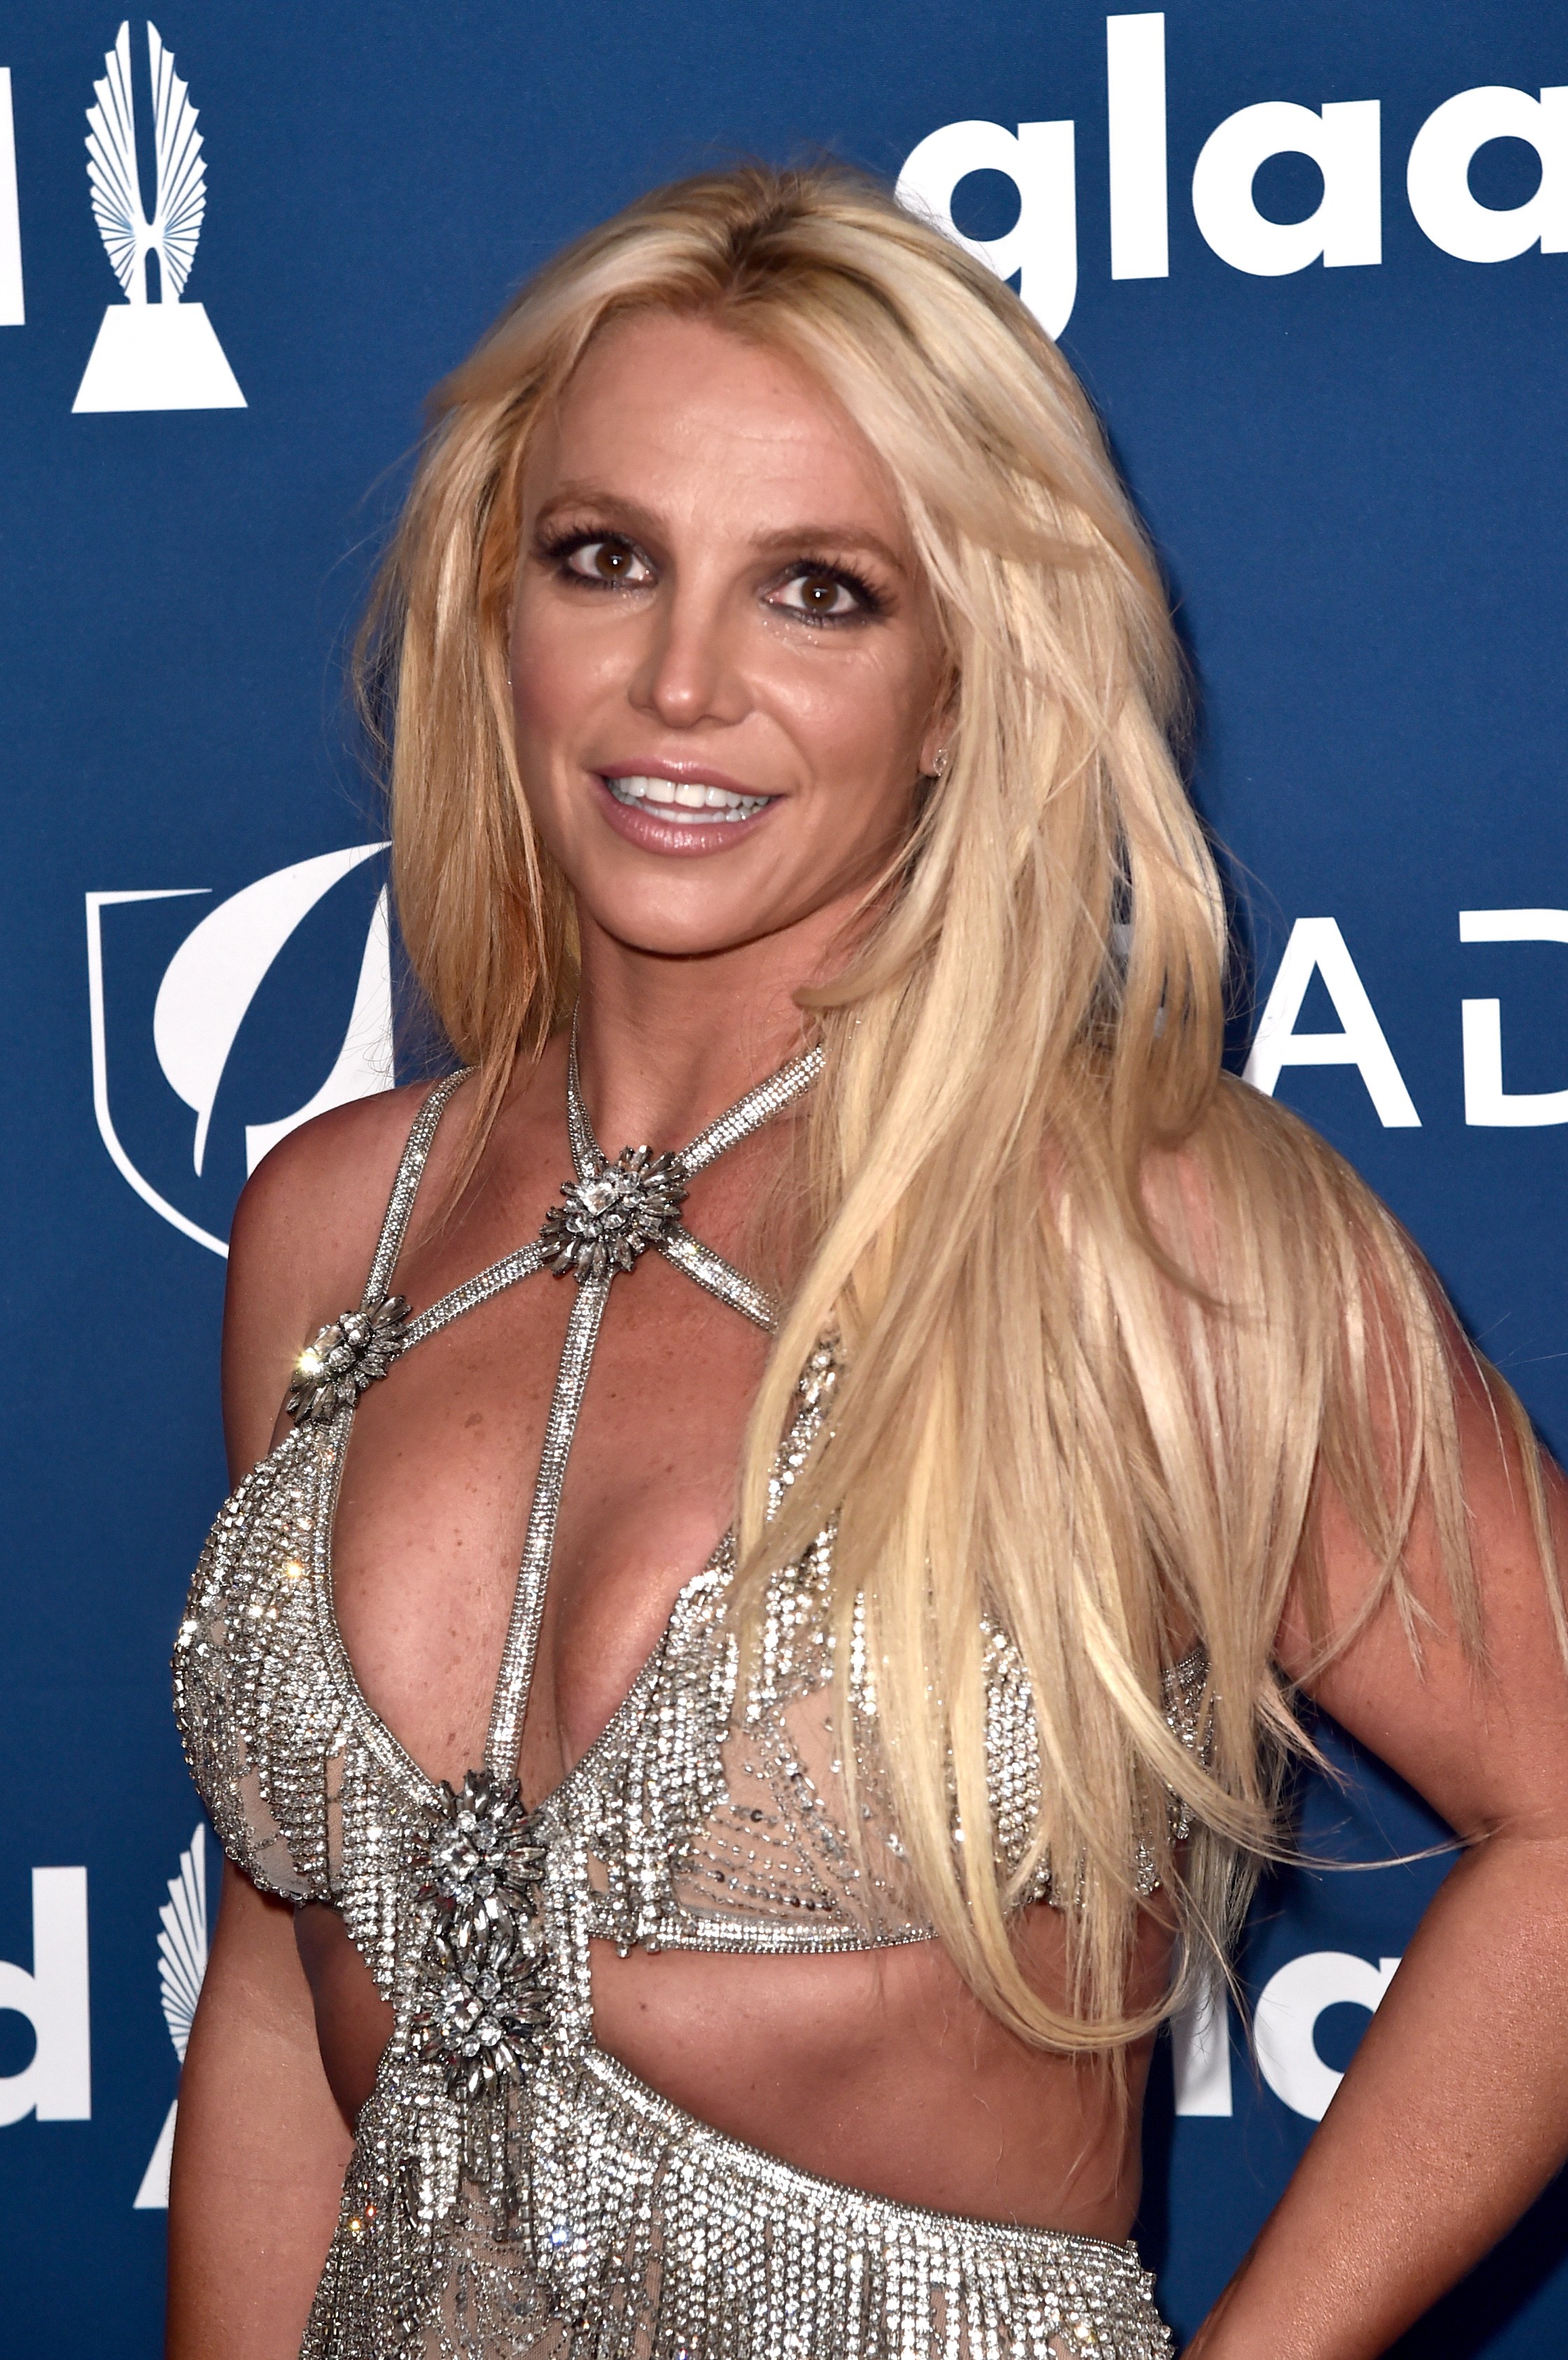 BEVERLY HILLS, CA - APRIL 12:  Honoree Britney Spears attends the 29th Annual GLAAD Media Awards at The Beverly Hilton Hotel on April 12, 2018 in Beverly Hills, California.  (Photo by Alberto E. Rodriguez/Getty Images)